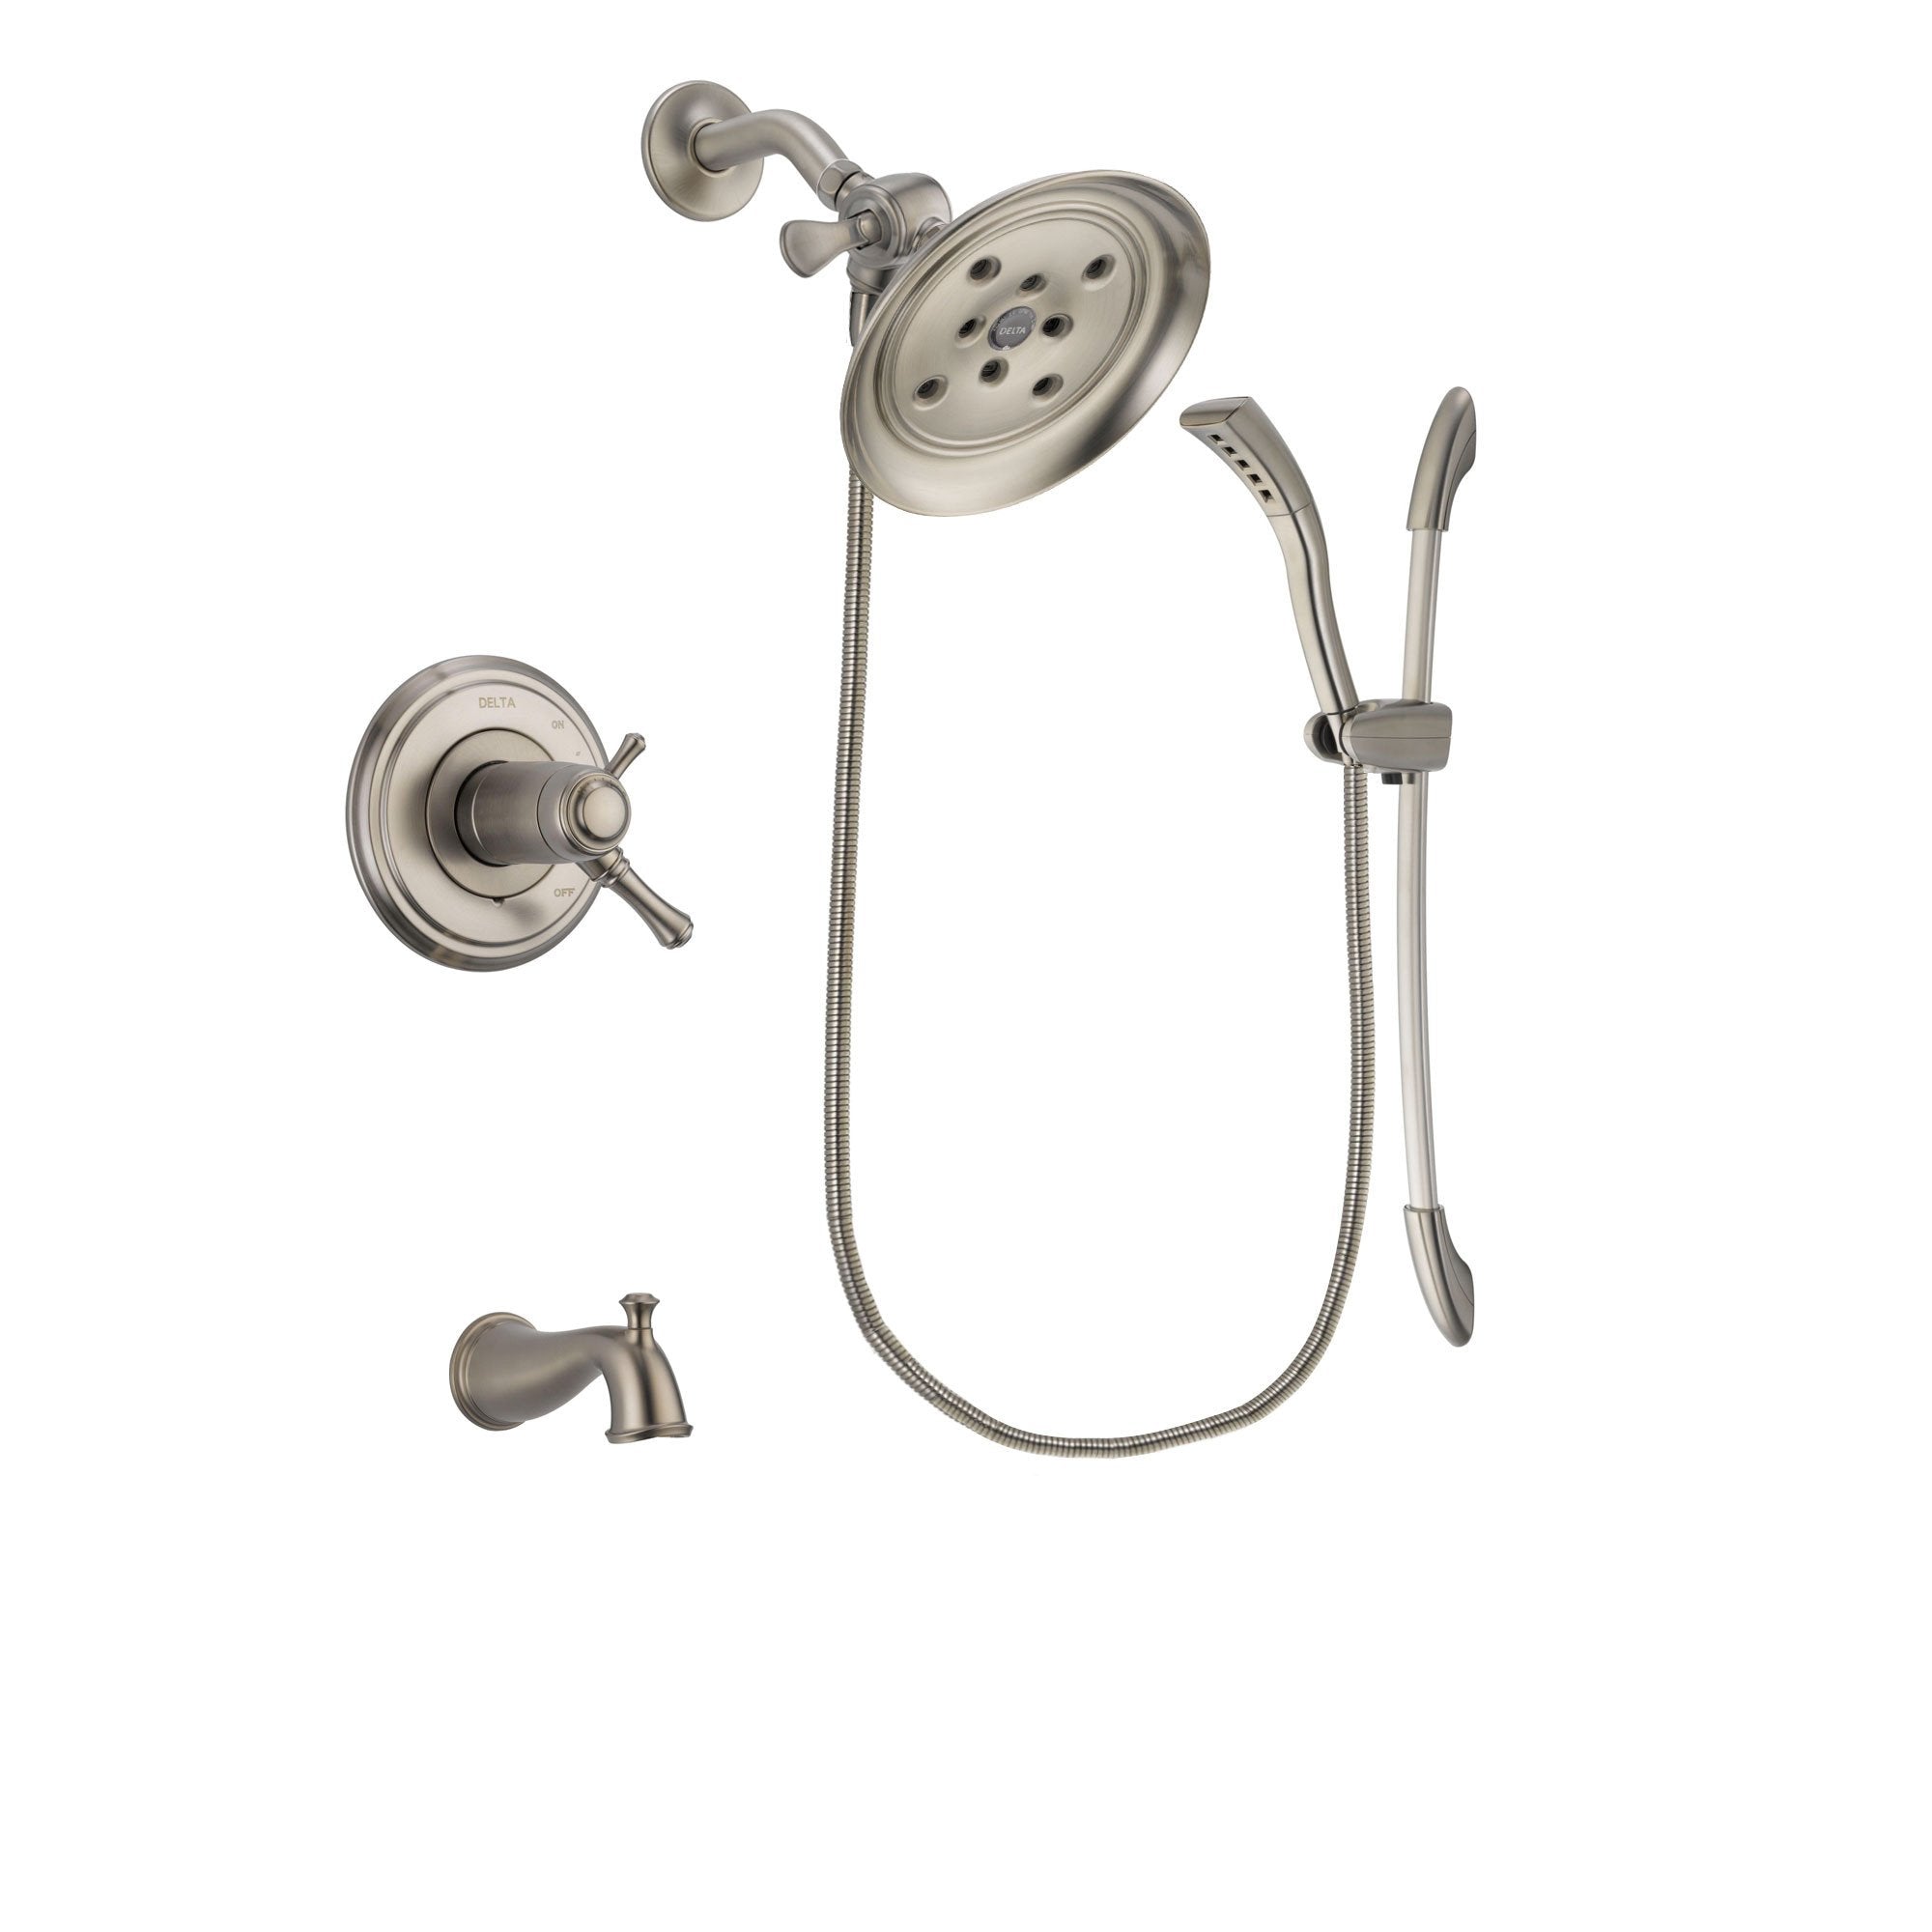 Delta Cassidy Stainless Steel Finish Thermostatic Tub and Shower Faucet System Package with Large Rain Showerhead and Handshower with Slide Bar Includes Rough-in Valve and Tub Spout DSP1453V